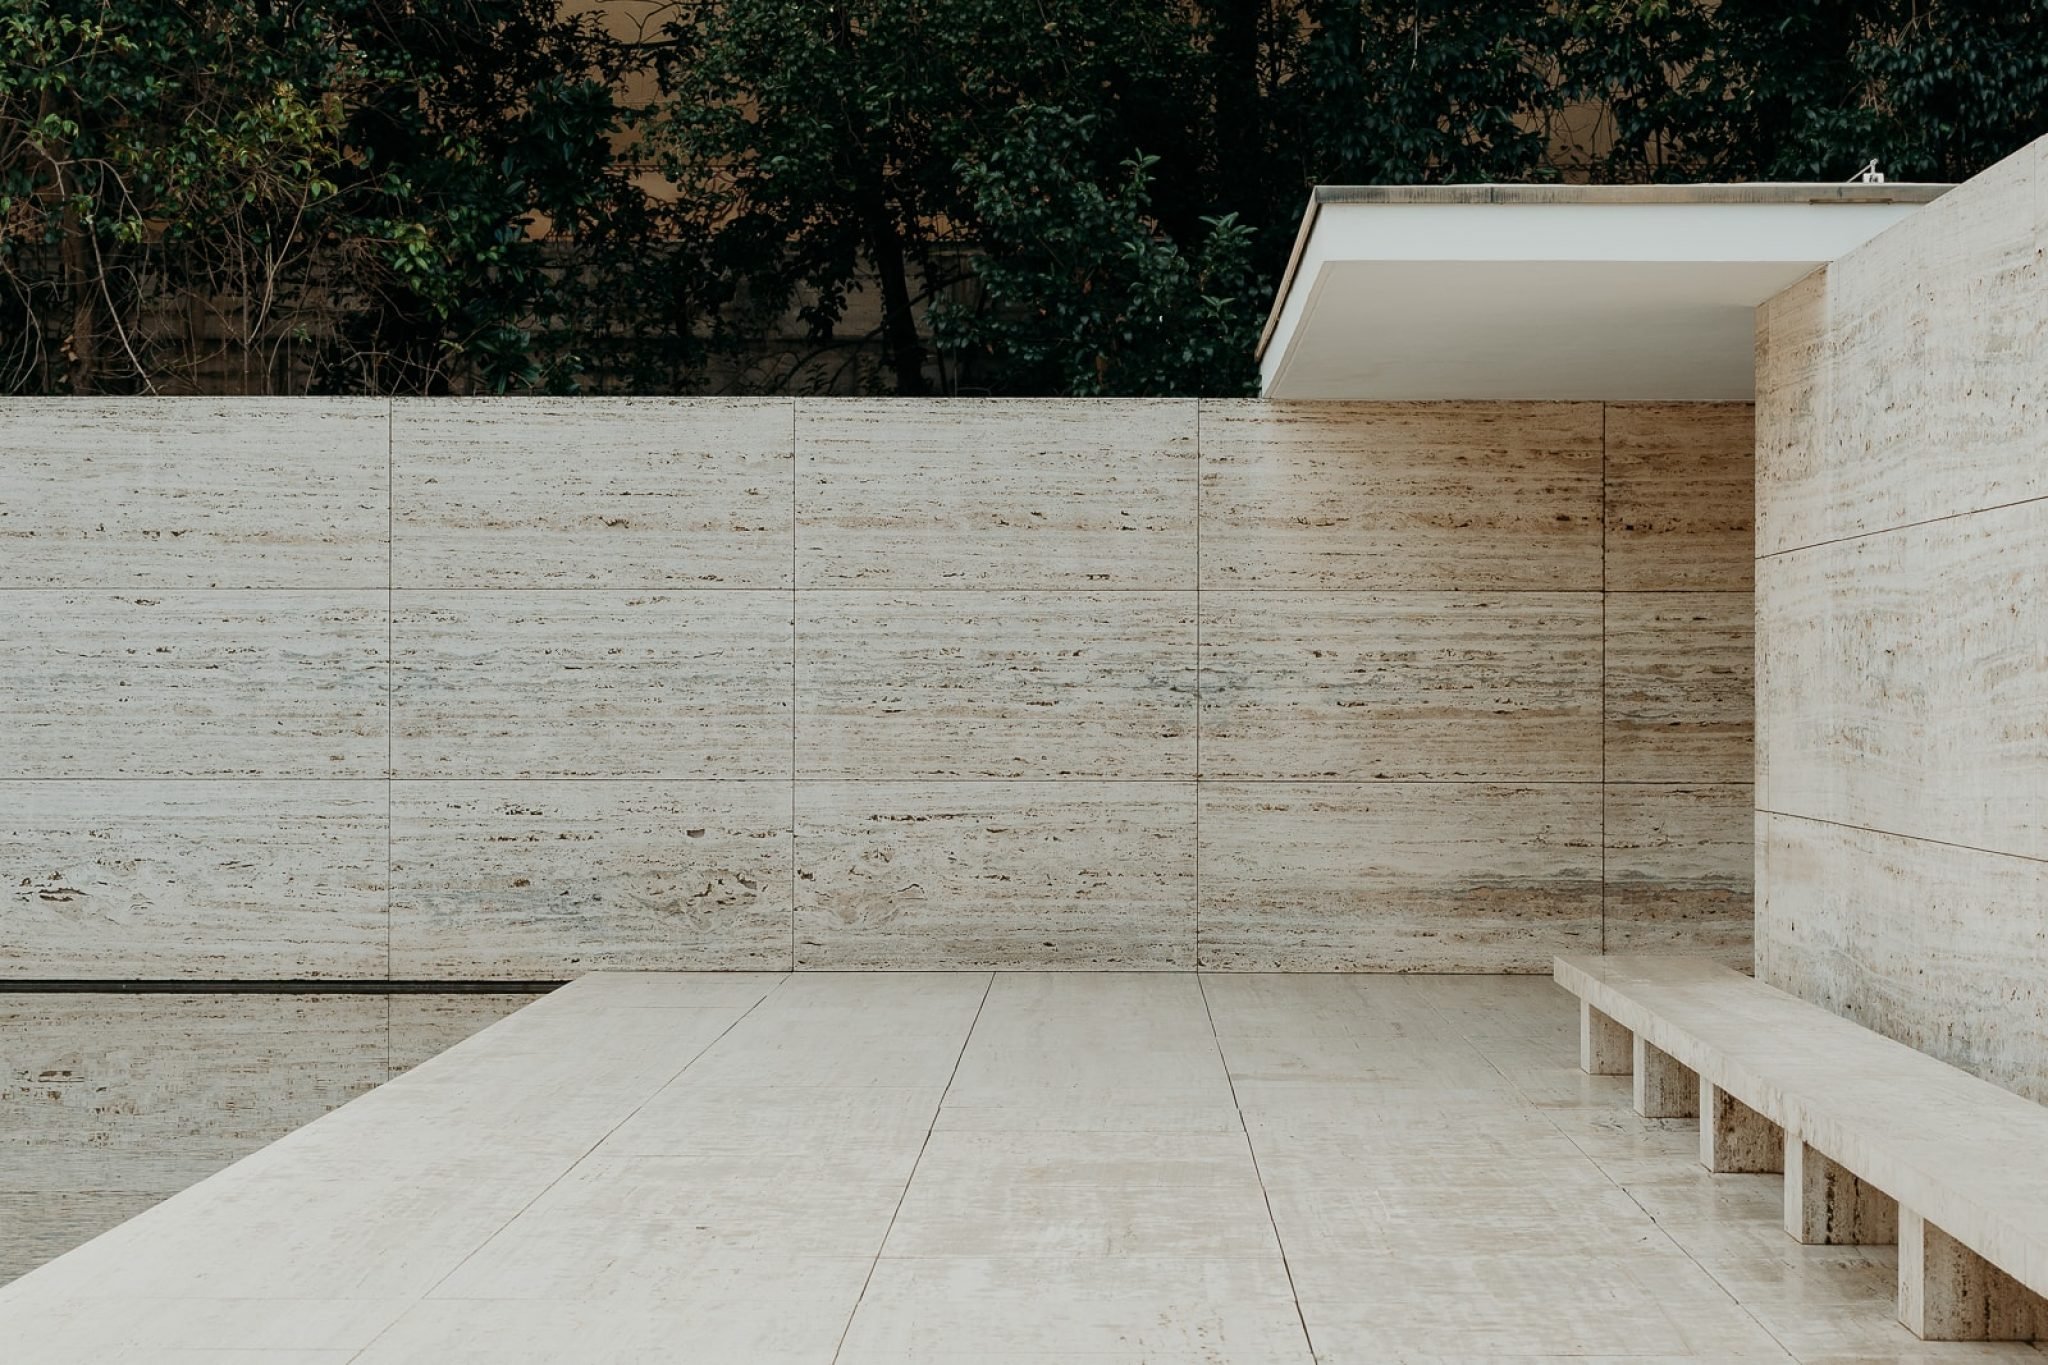 The Barcelona Pavilion By Ludwig Mies Van Der Rohe Is A Textural